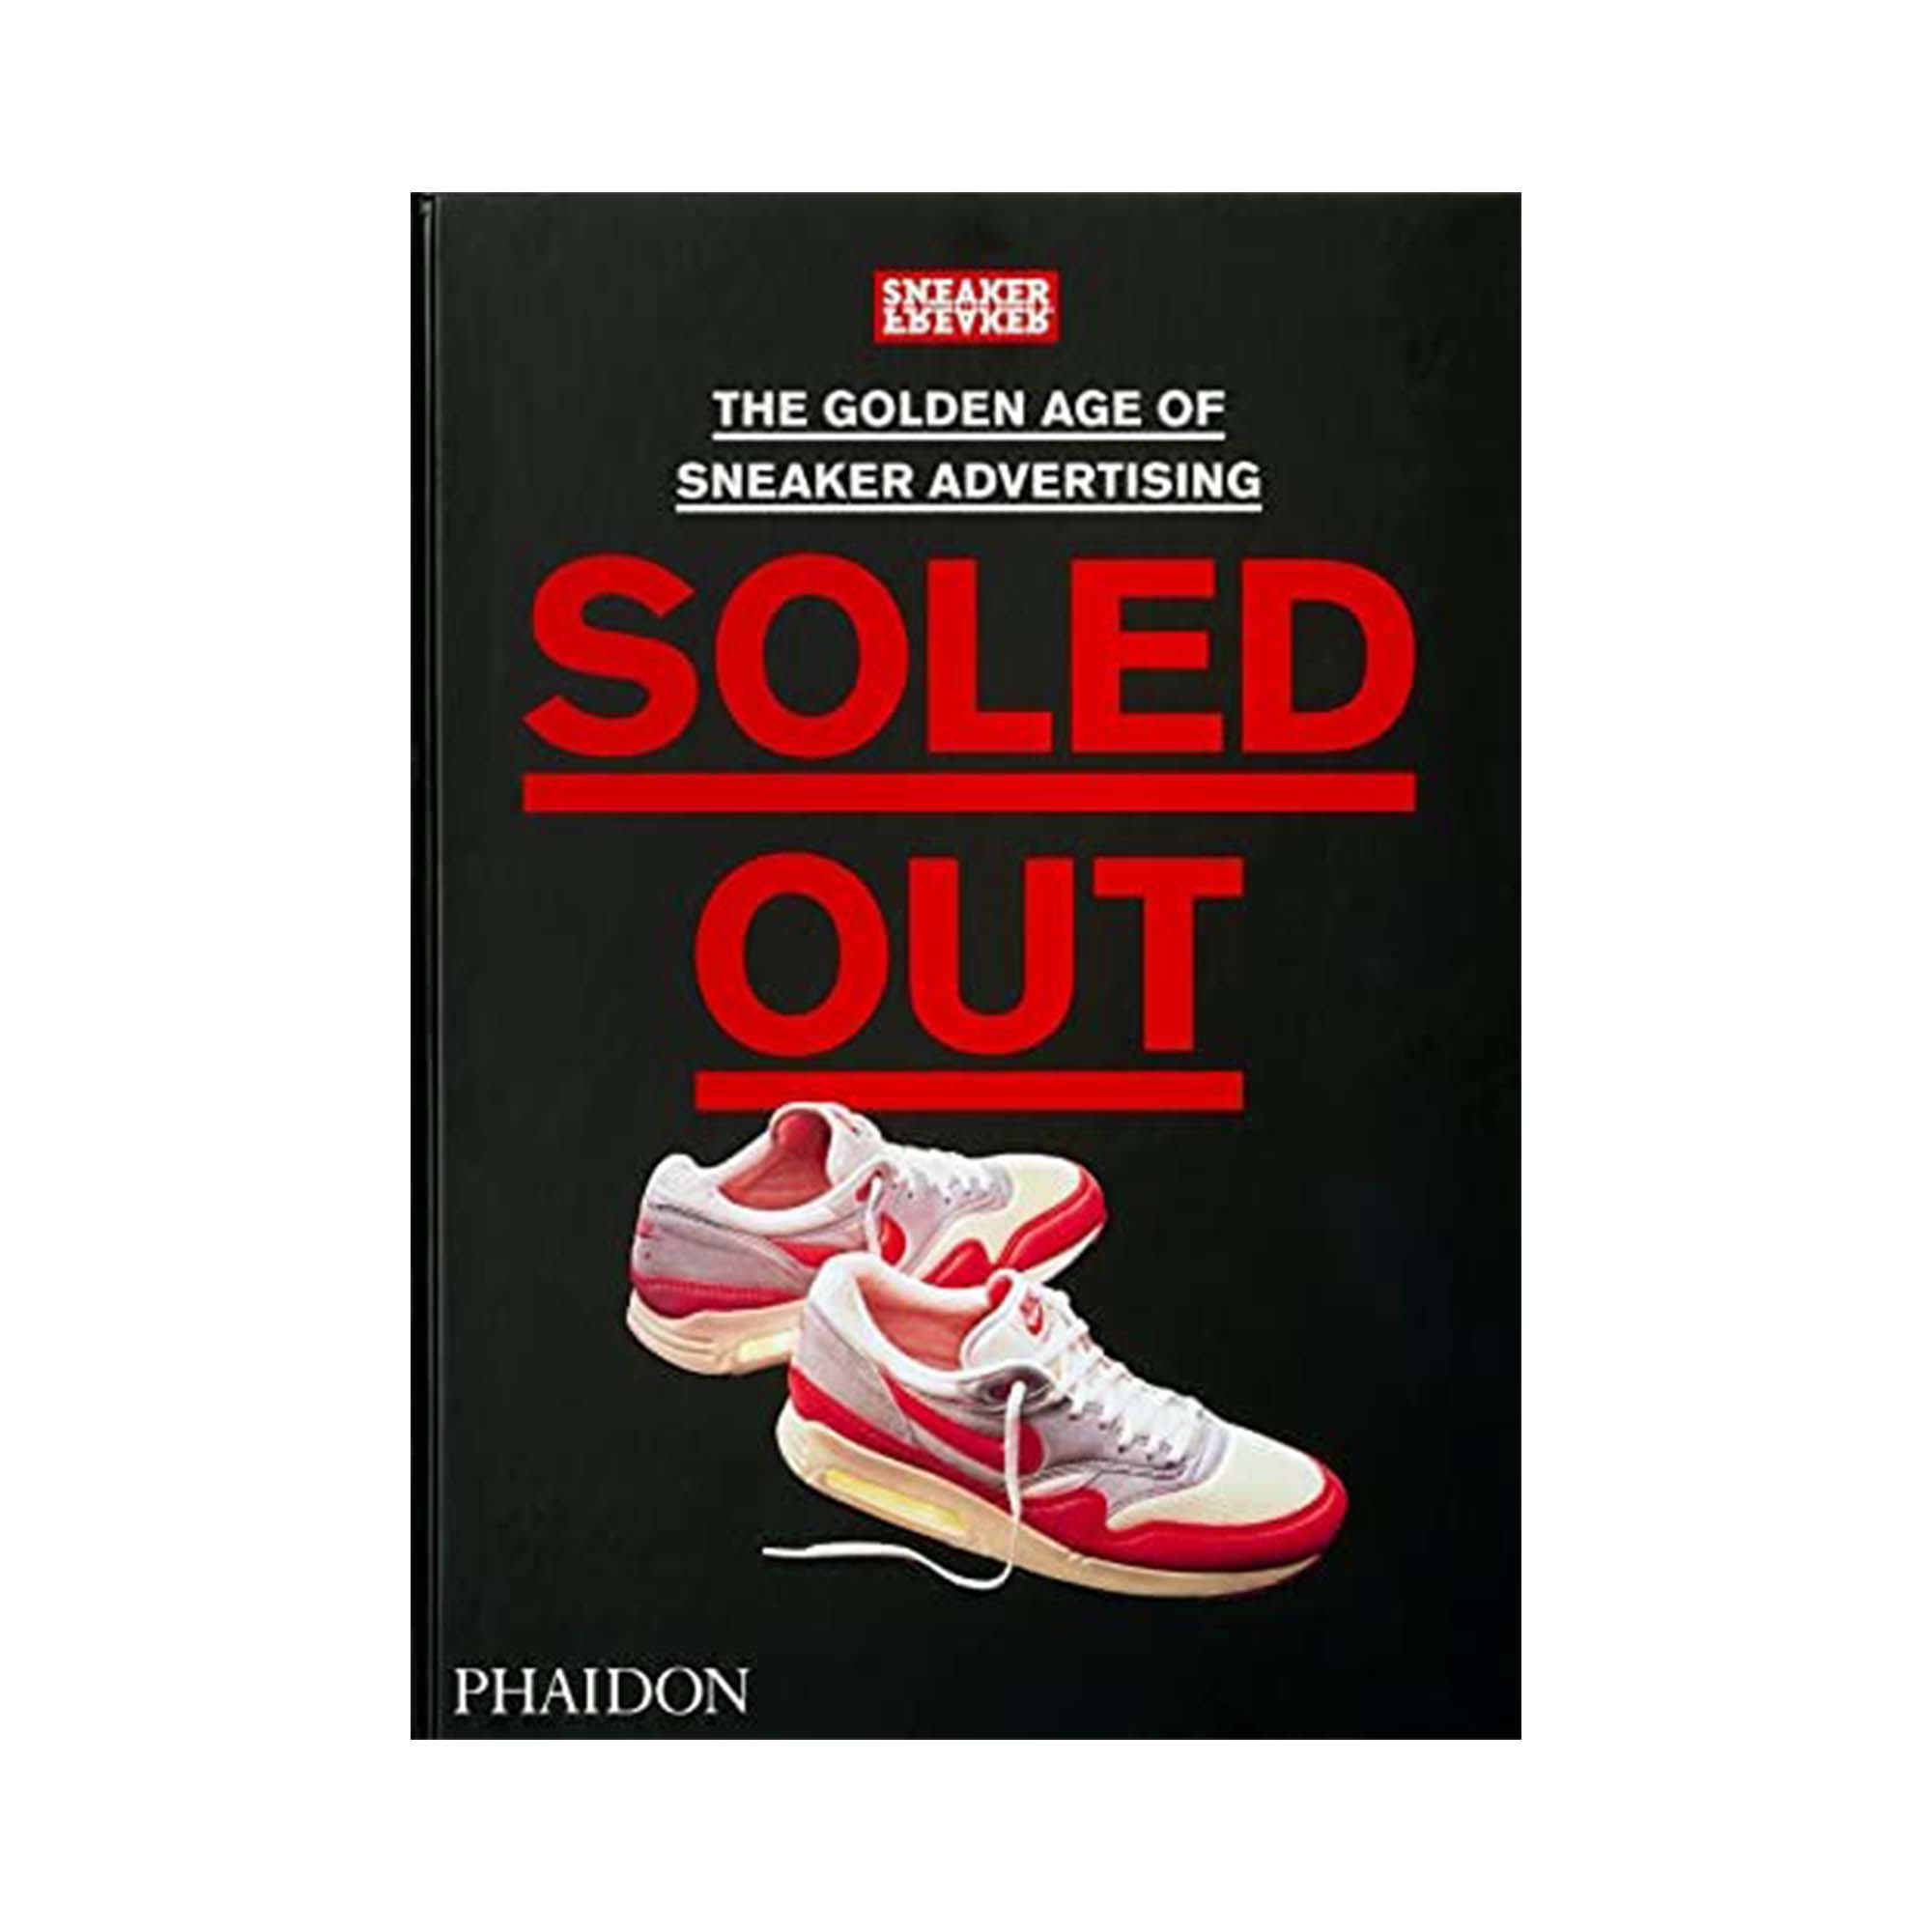 Soled Out: The Golden Age of Sneaker Advertising (A Sneaker Freaker Book) - כריכה קשה